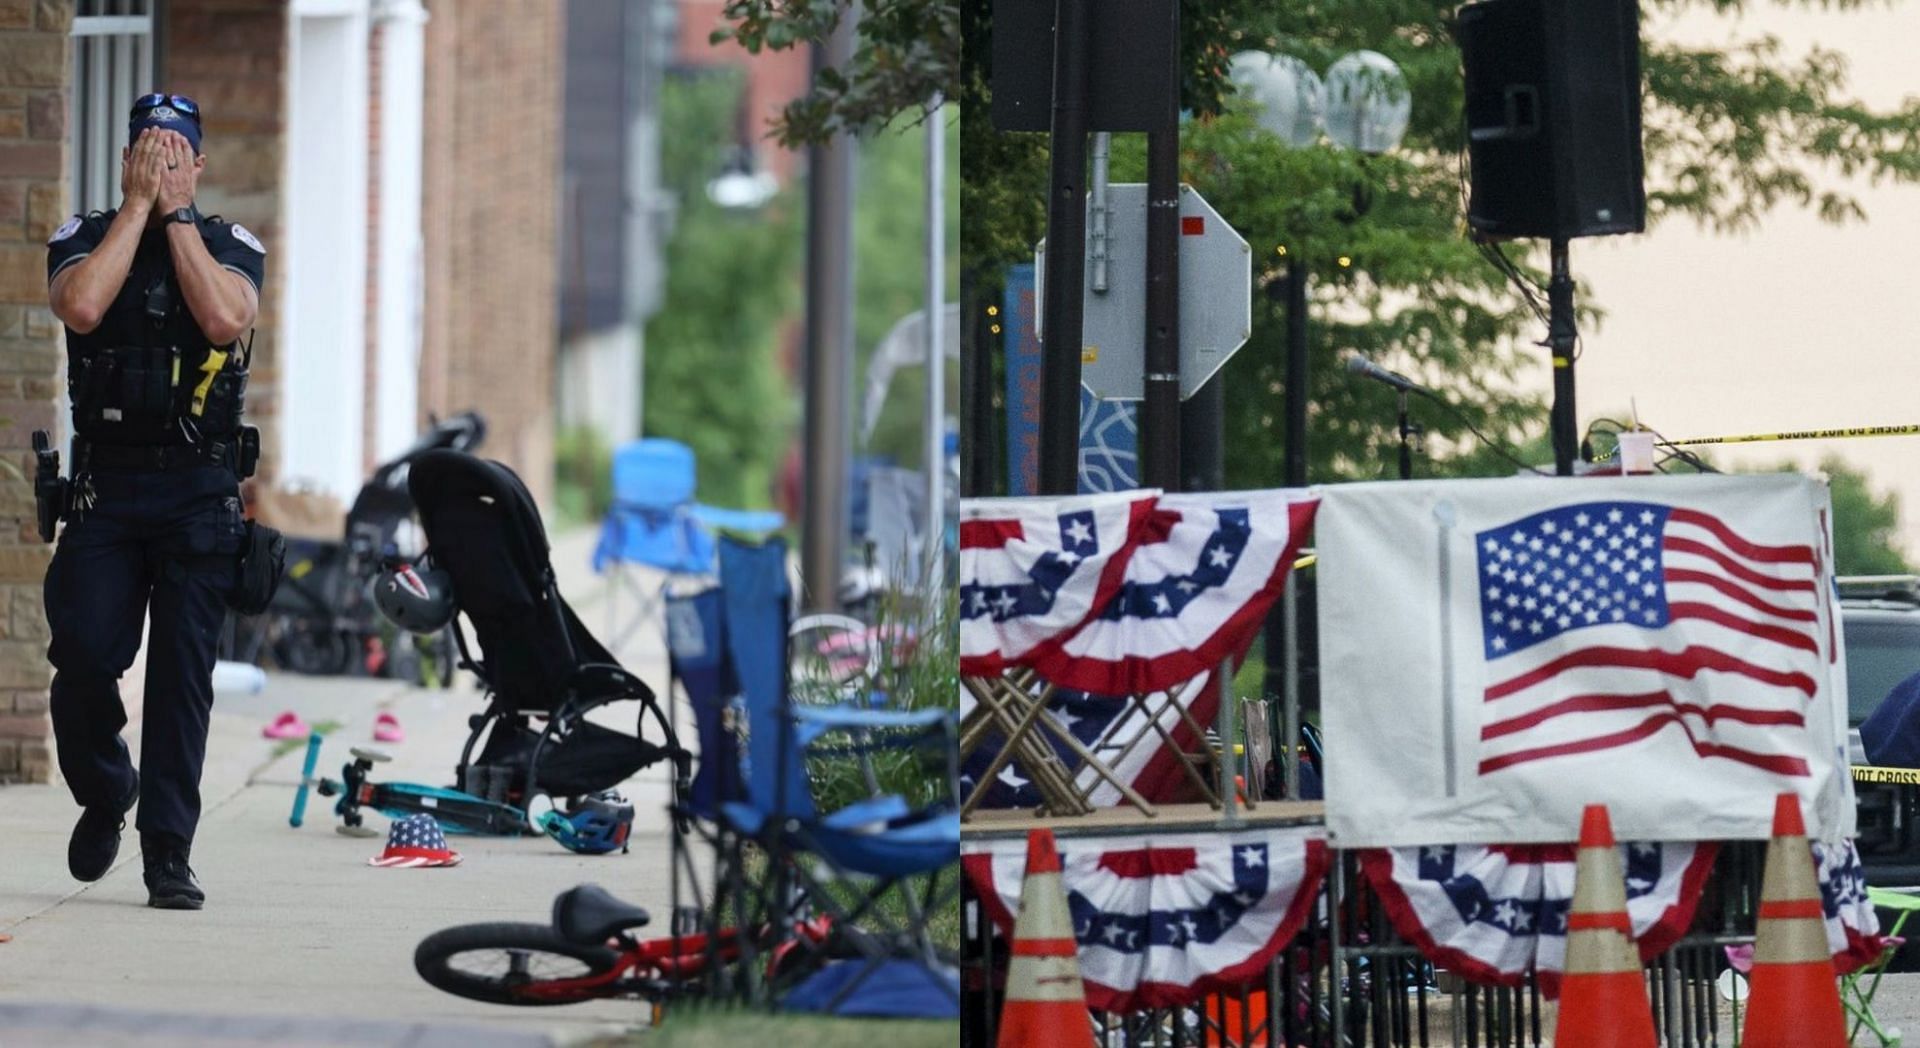 Highland Park Fourth of July parade shooting left six dead and several people injured (Image via Amy Klobuchar/Twitter and Getty Images)